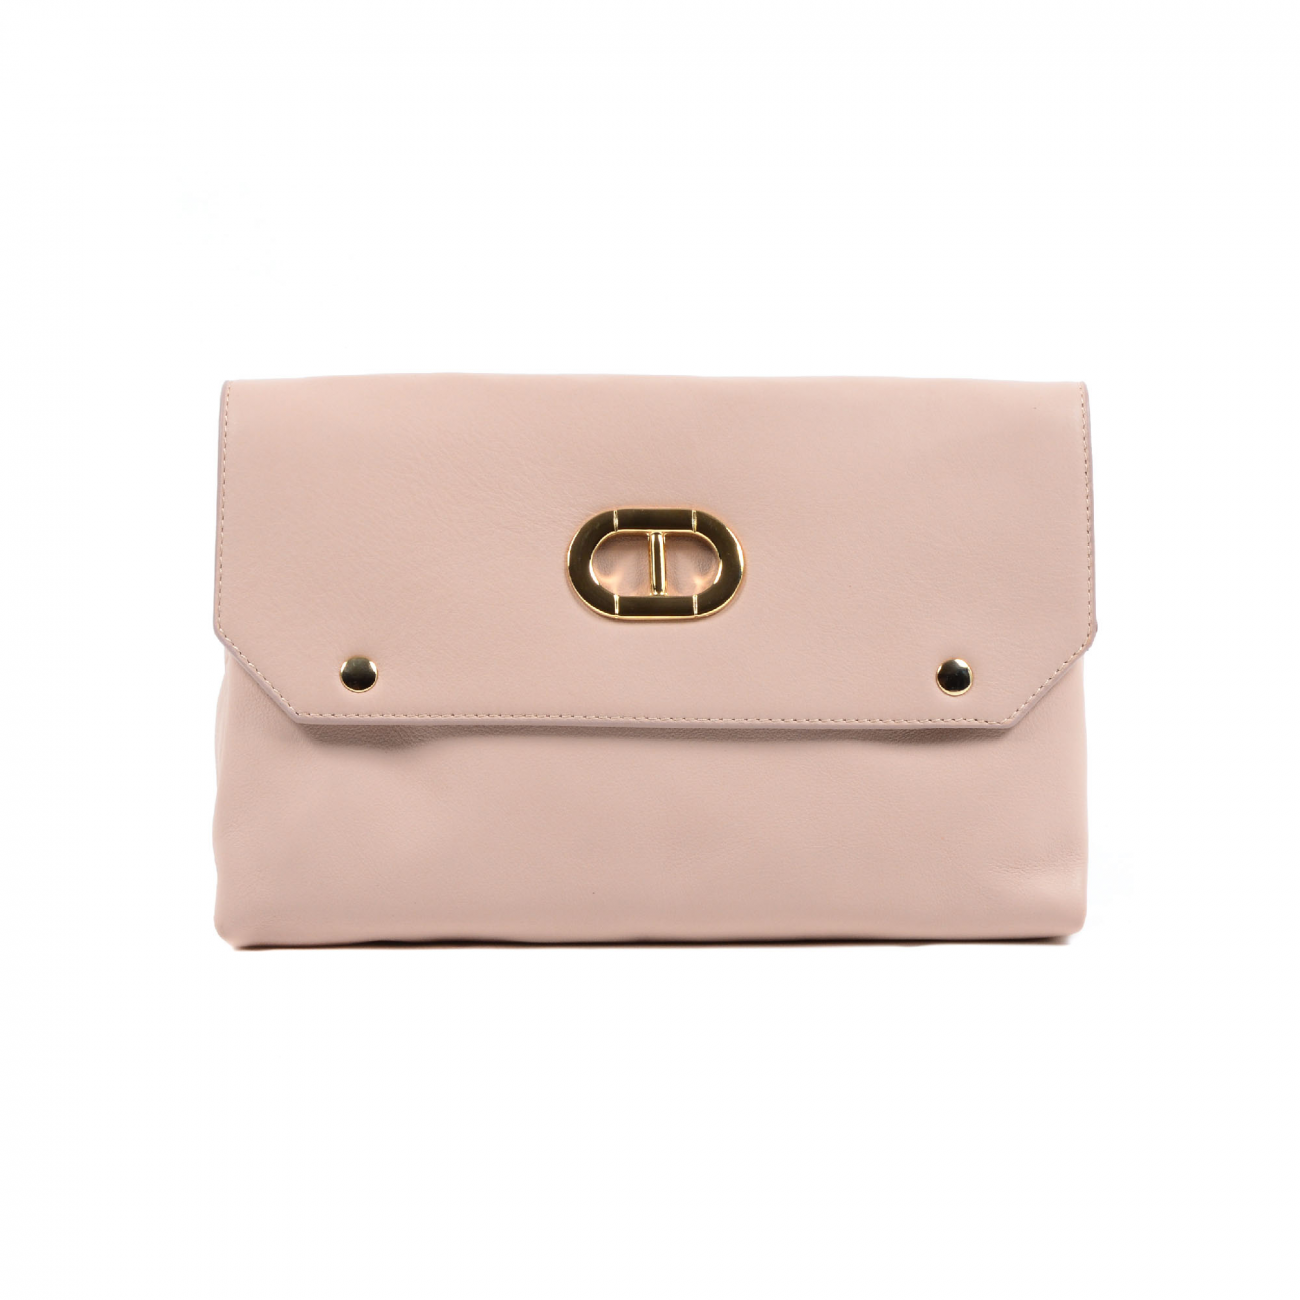 Details: GM2023 MIAMI SILVER PINK - Color: Pink - Composition: 100% LEATHER - Measures (Width-Height-Depth): 26x16x6 cm - Made: ITALY - Front Logo - Botton Closure - Logo Inside - Two Inside Pocket - One Inside Zip Pocket